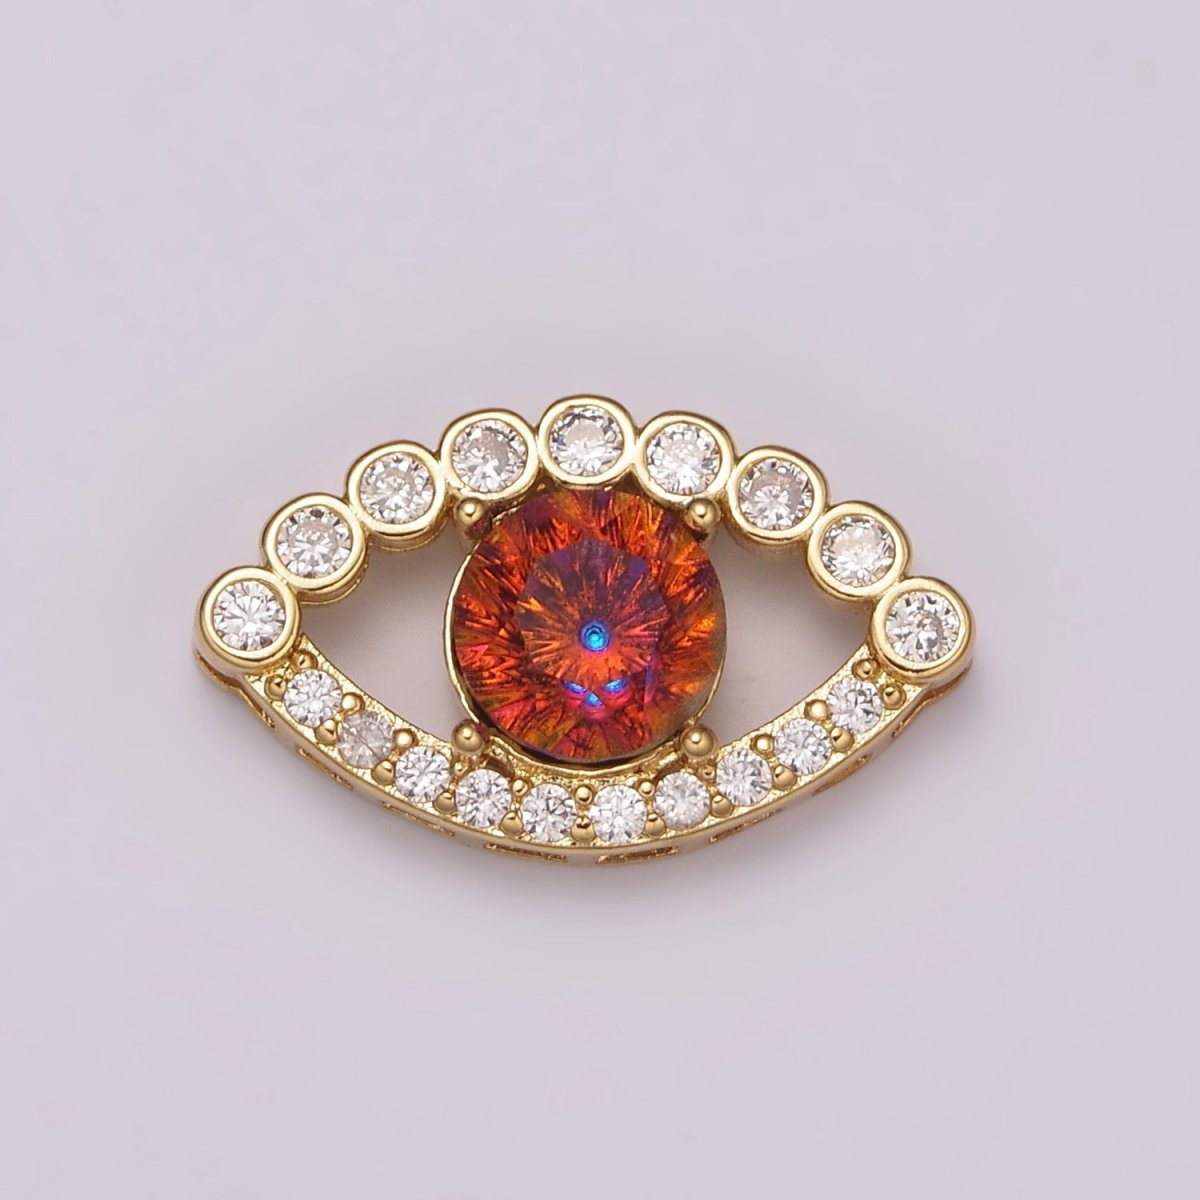 Mini Red Eye Cz Stone Bead Spacer for Bracelet Component Gold Filled Bead Connector B-708 - DLUXCA